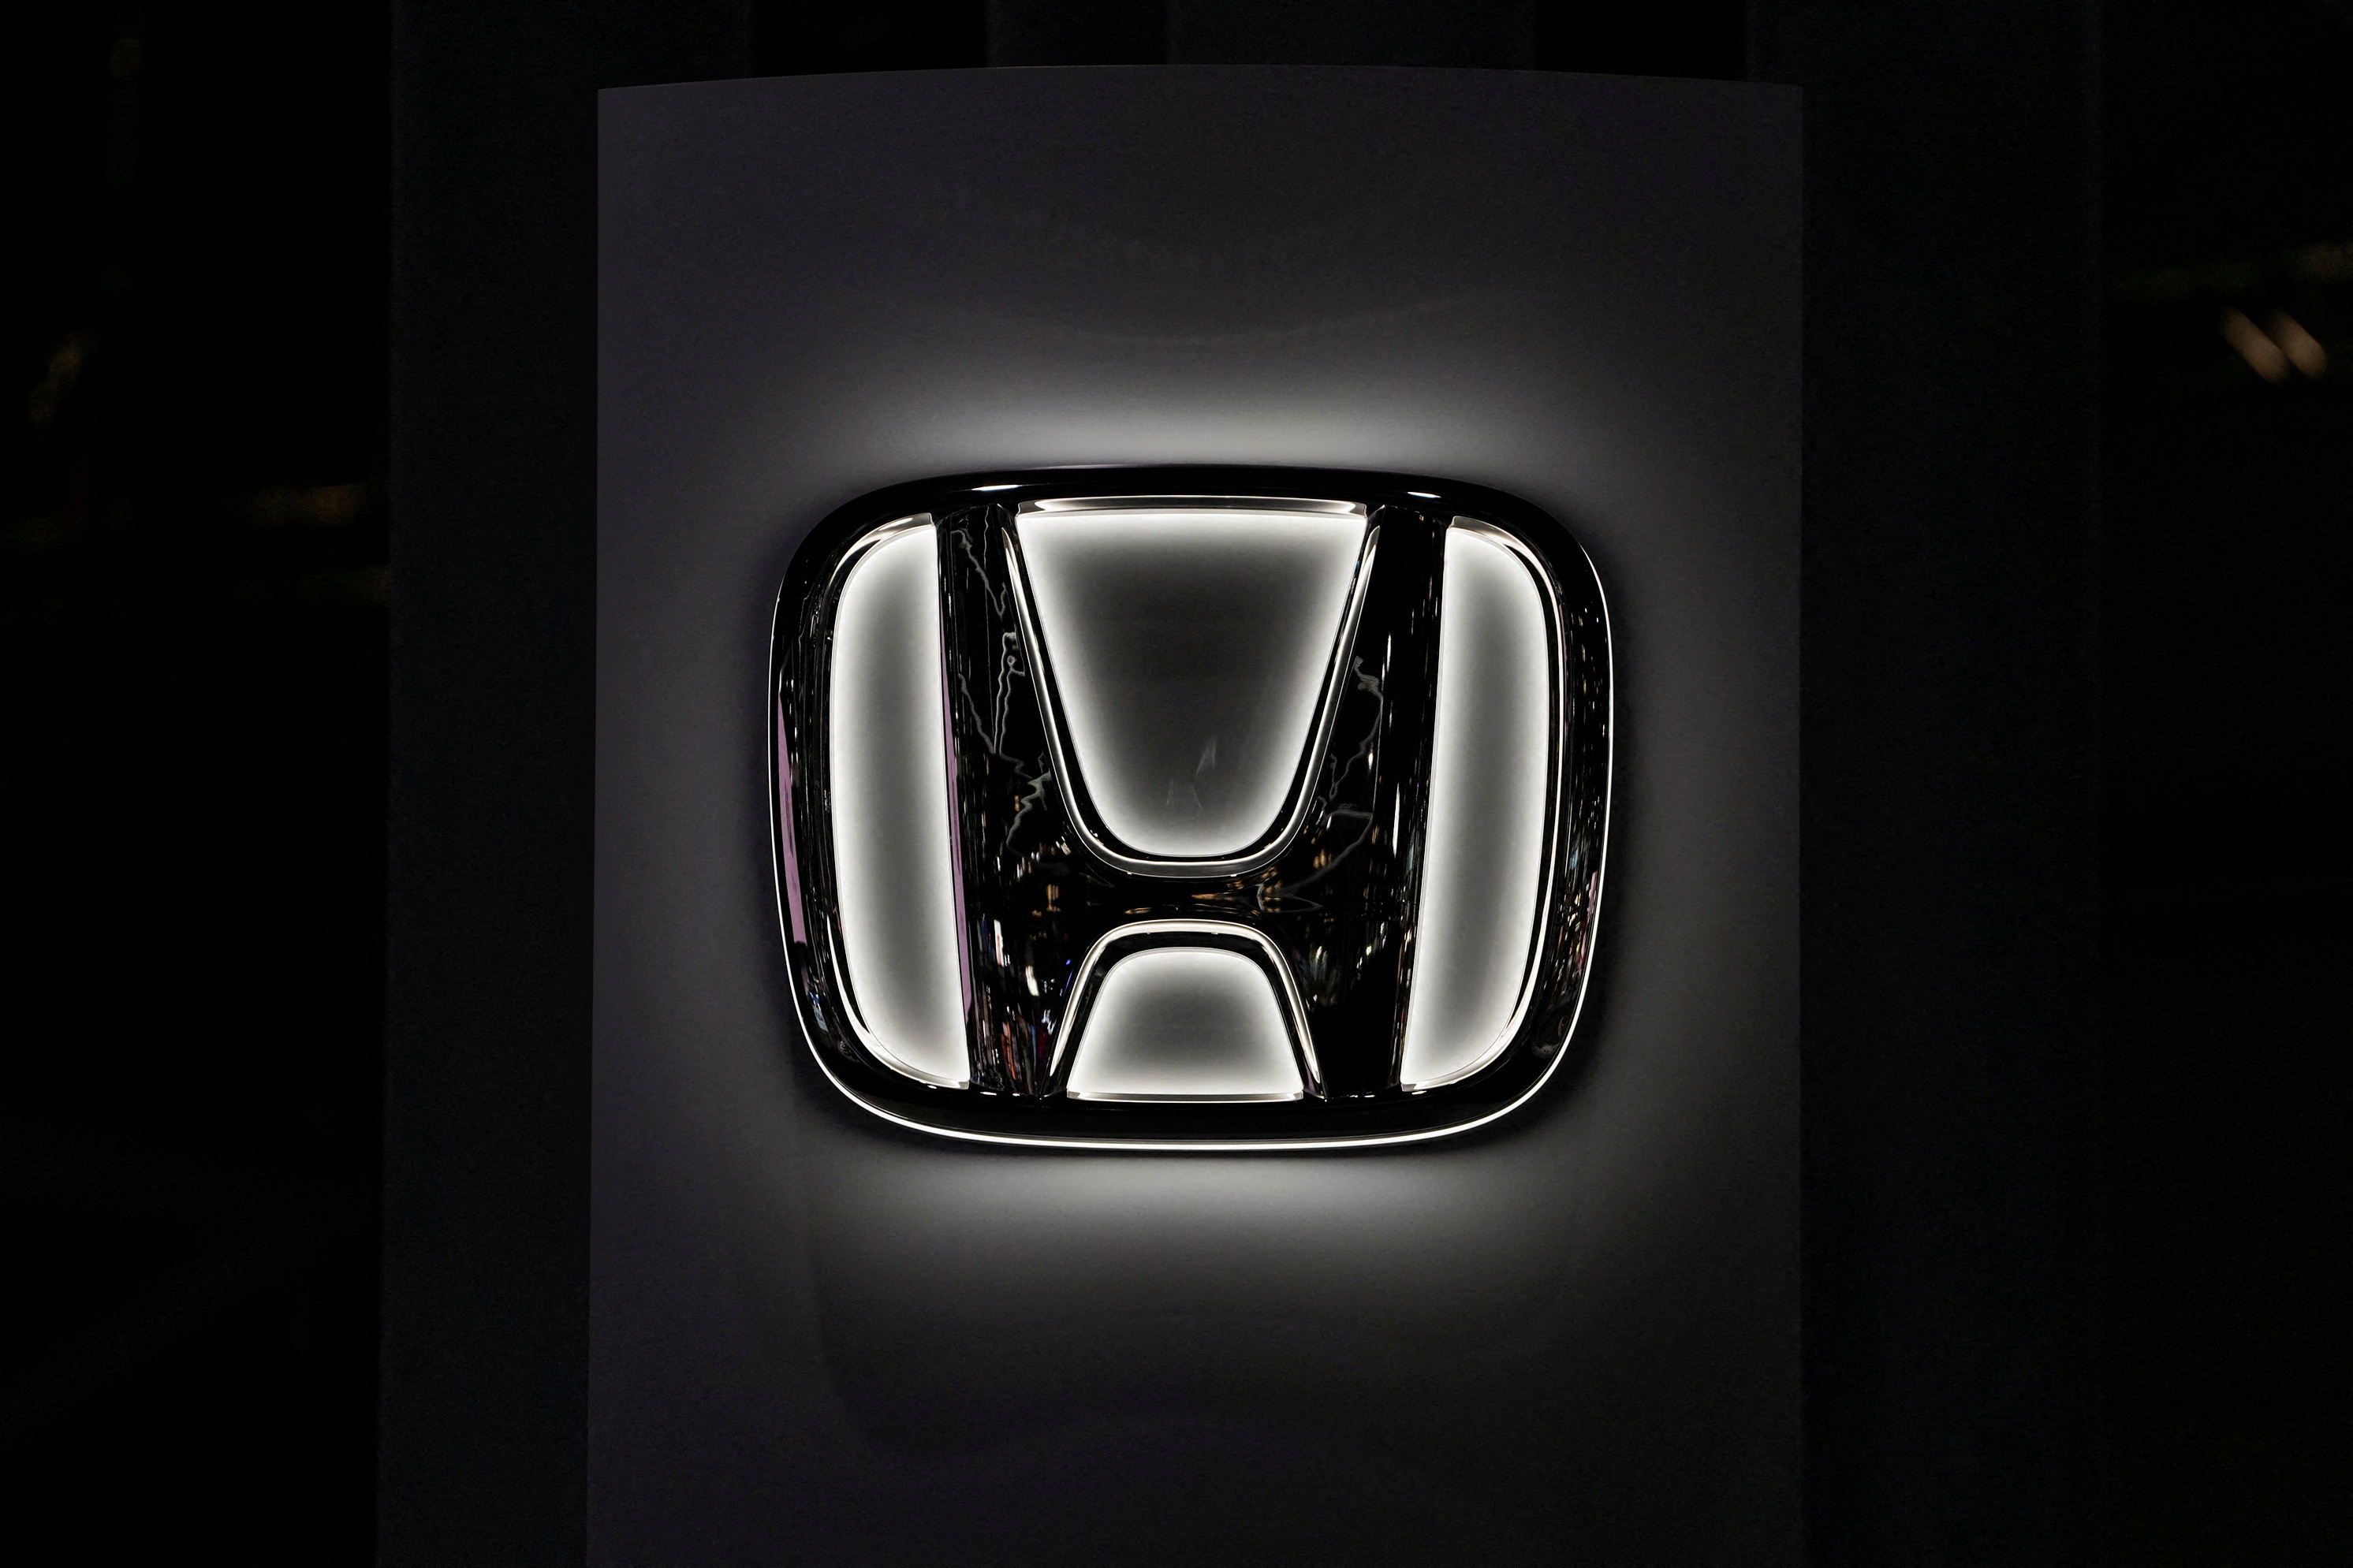 What Does the Honda and GM Partnership Mean?